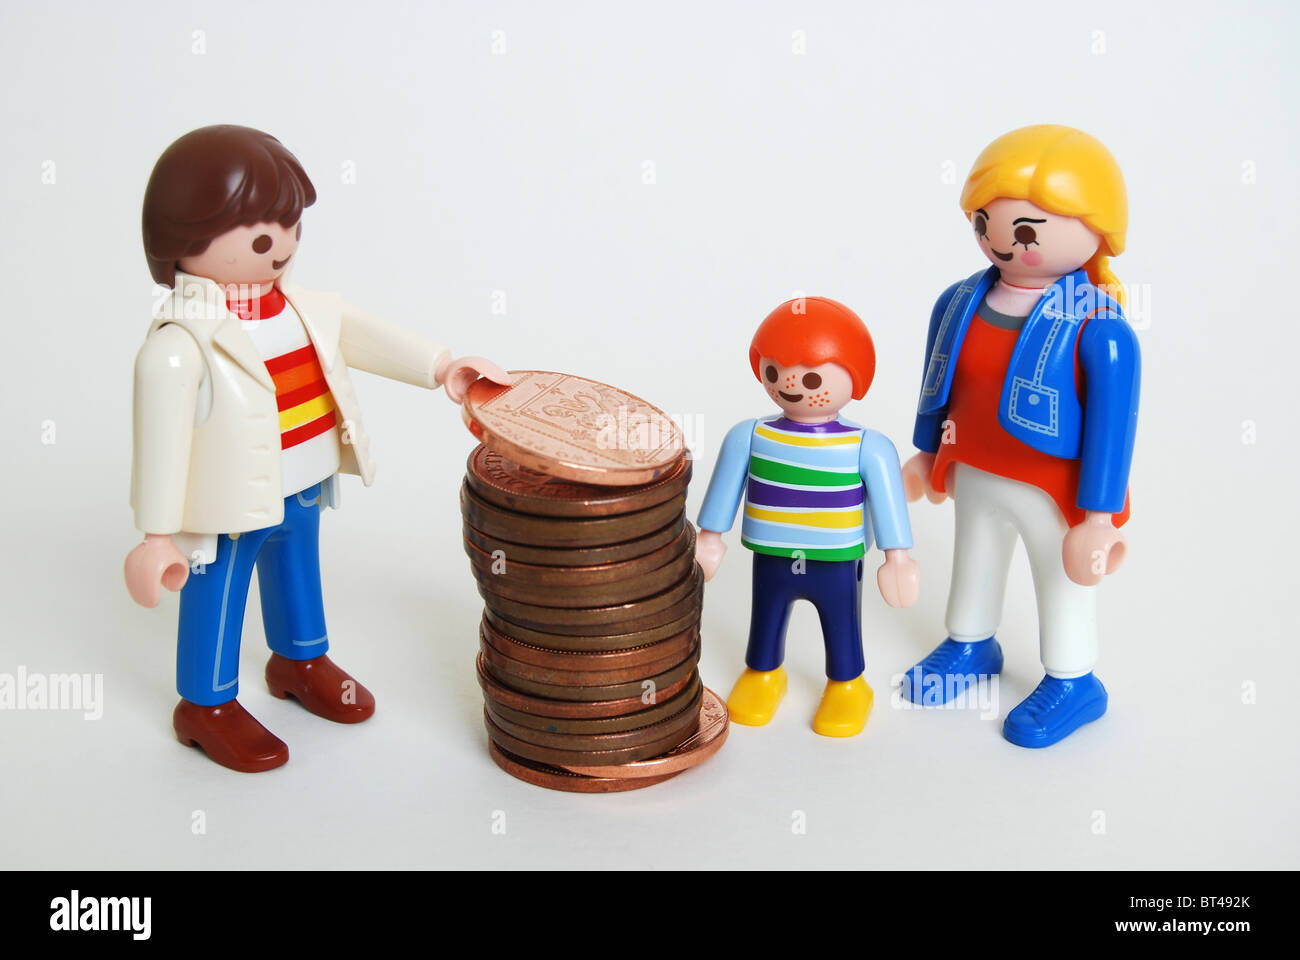 Personal finance savings education tuition fees Children money saving pennies cost childcare Stock Photo